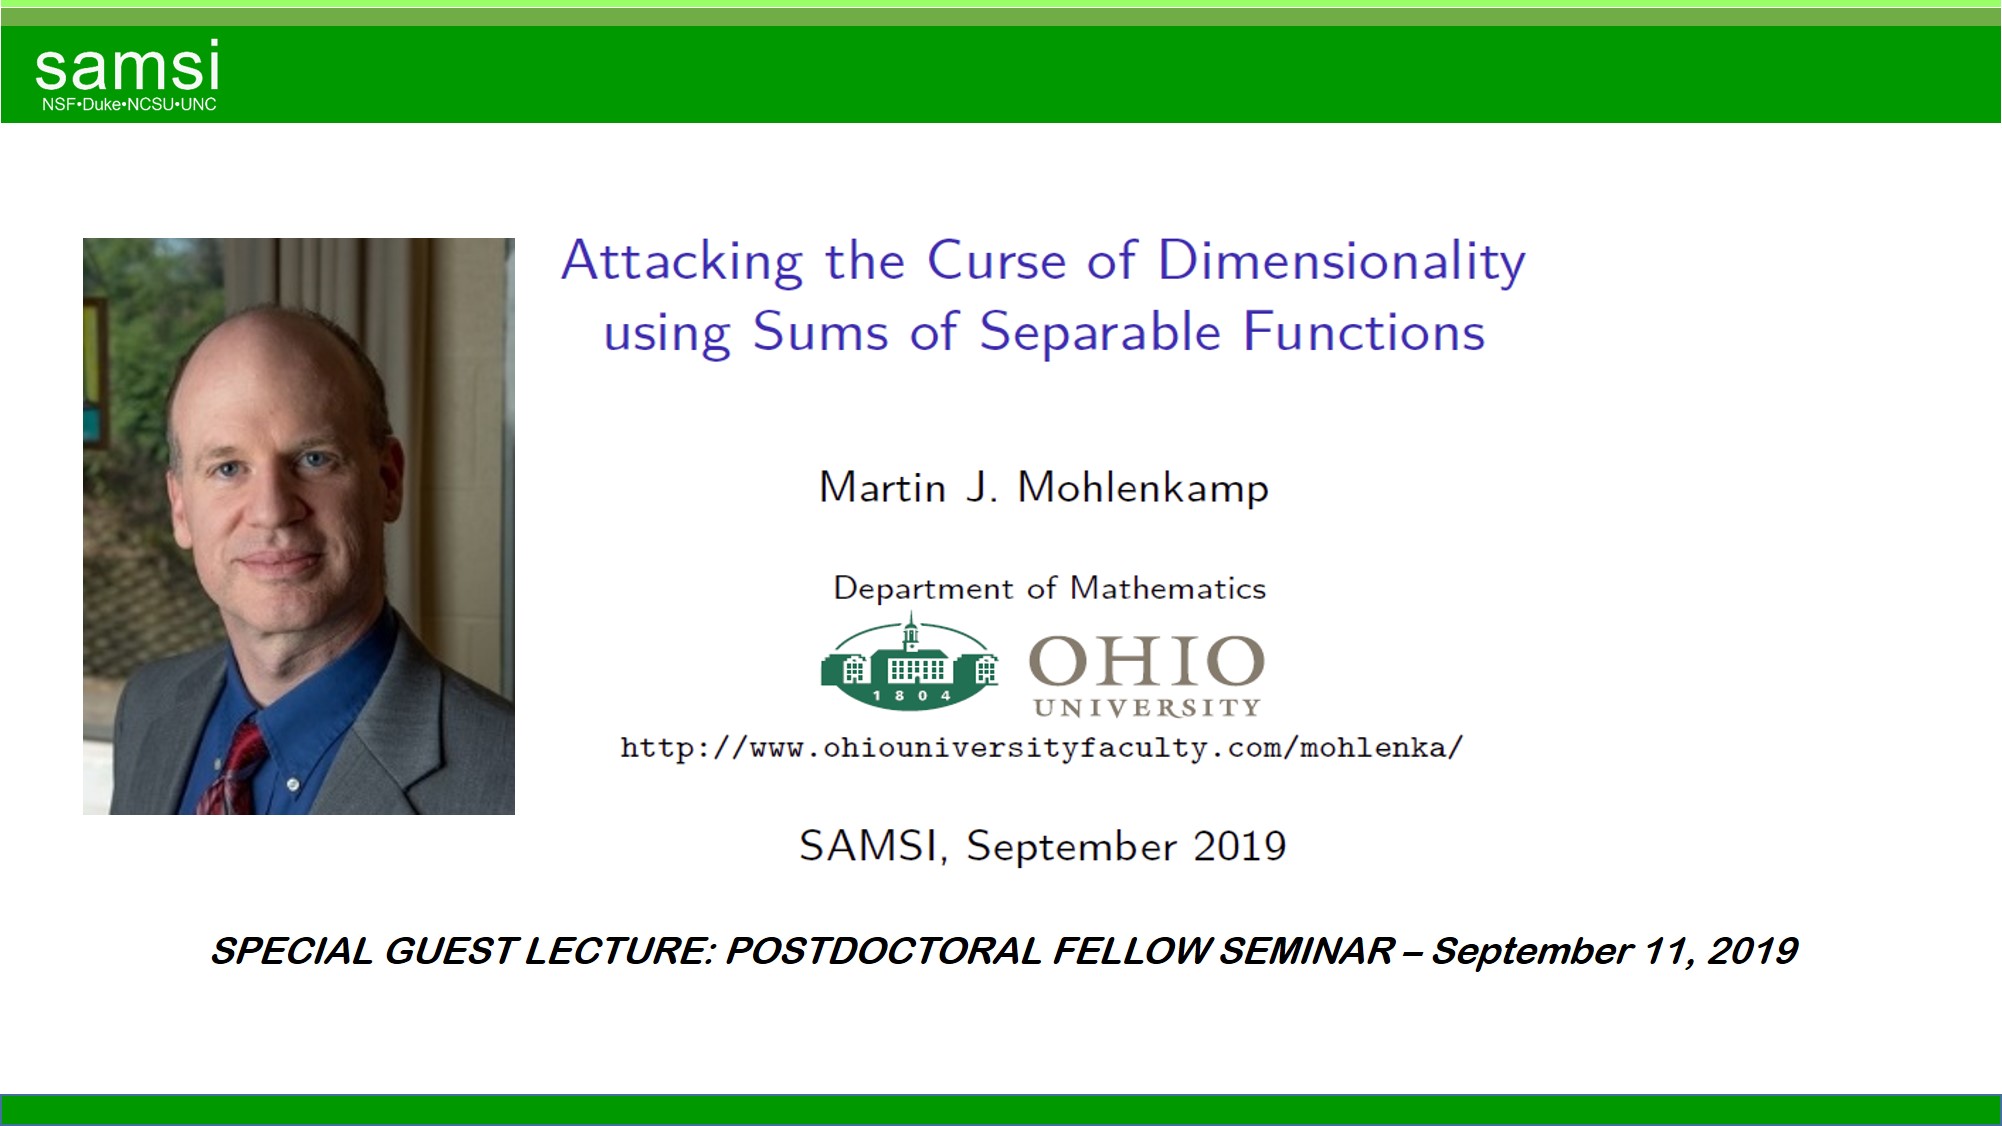 Special Guest Lecture: Attacking the Curse of Dimensionality, Martin Mohlenkamp Thumbnail